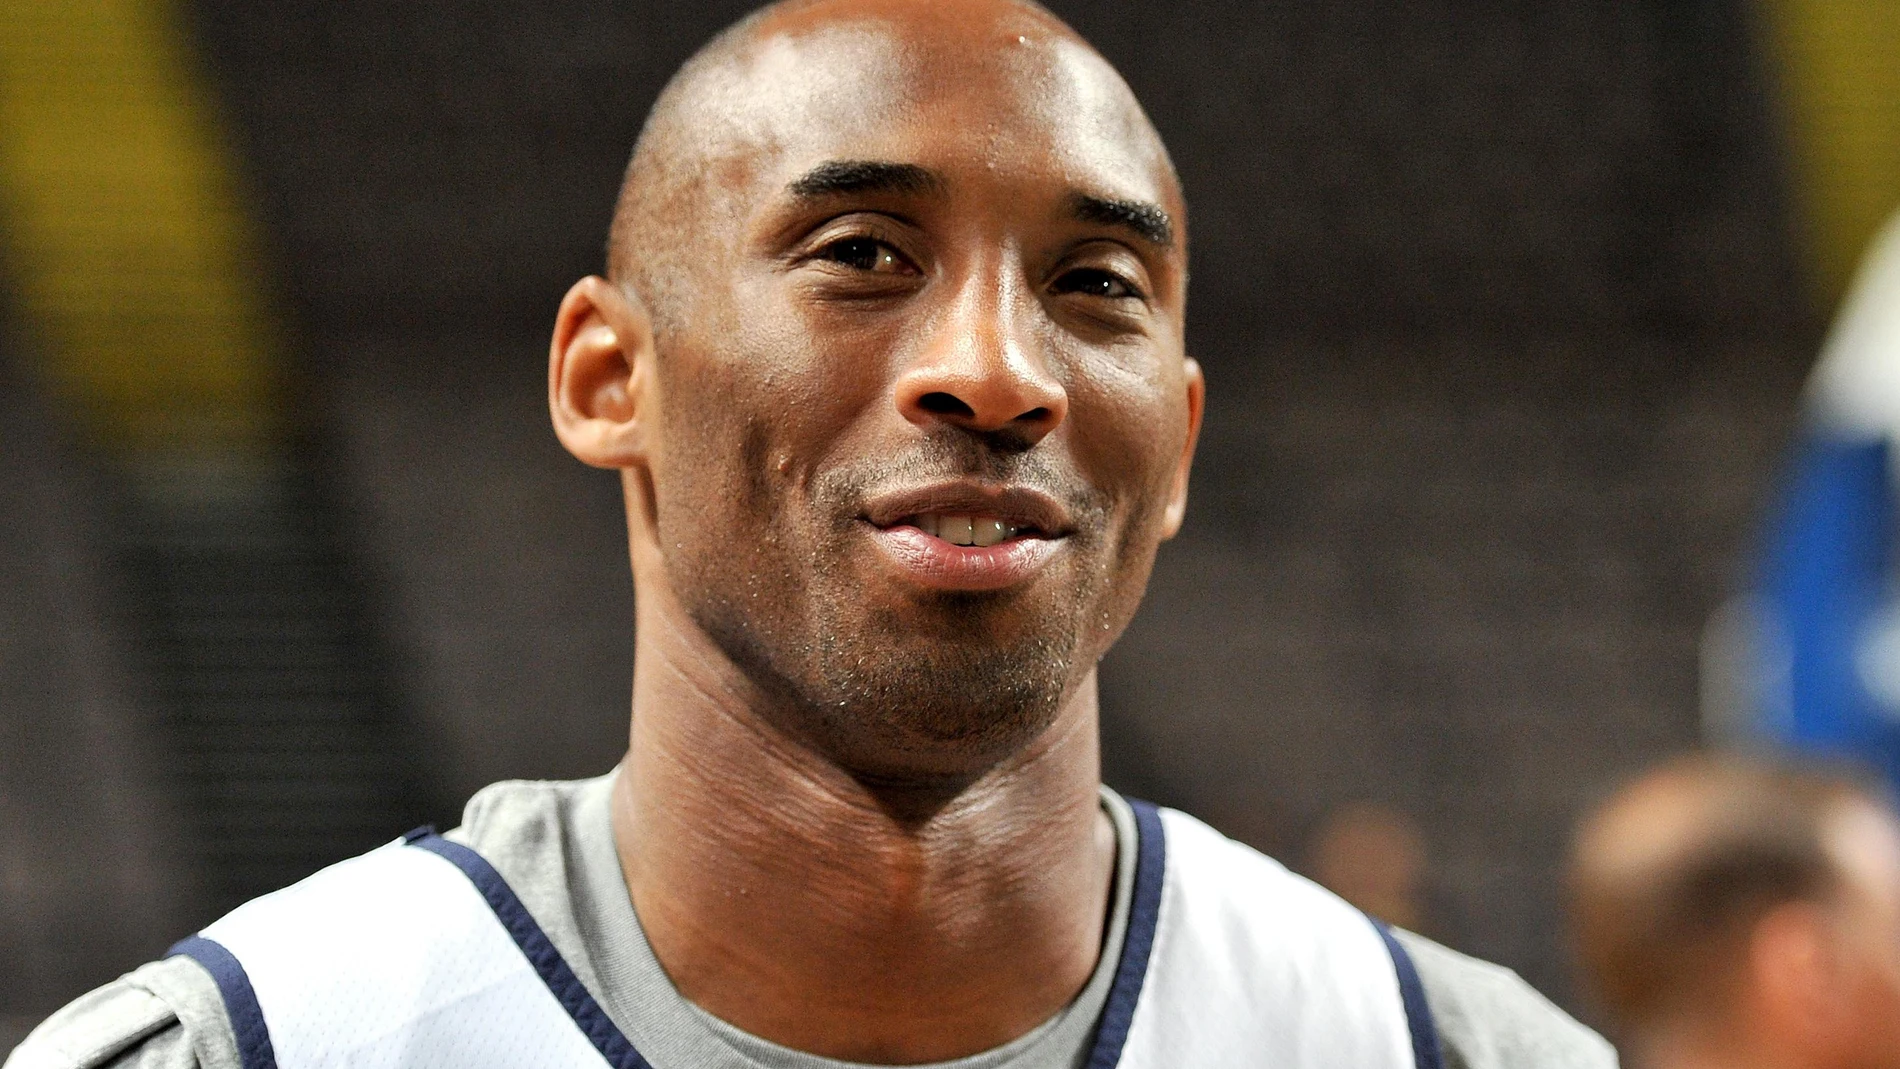 Kobe Bryant inducted into the Hall of Fame of basketball